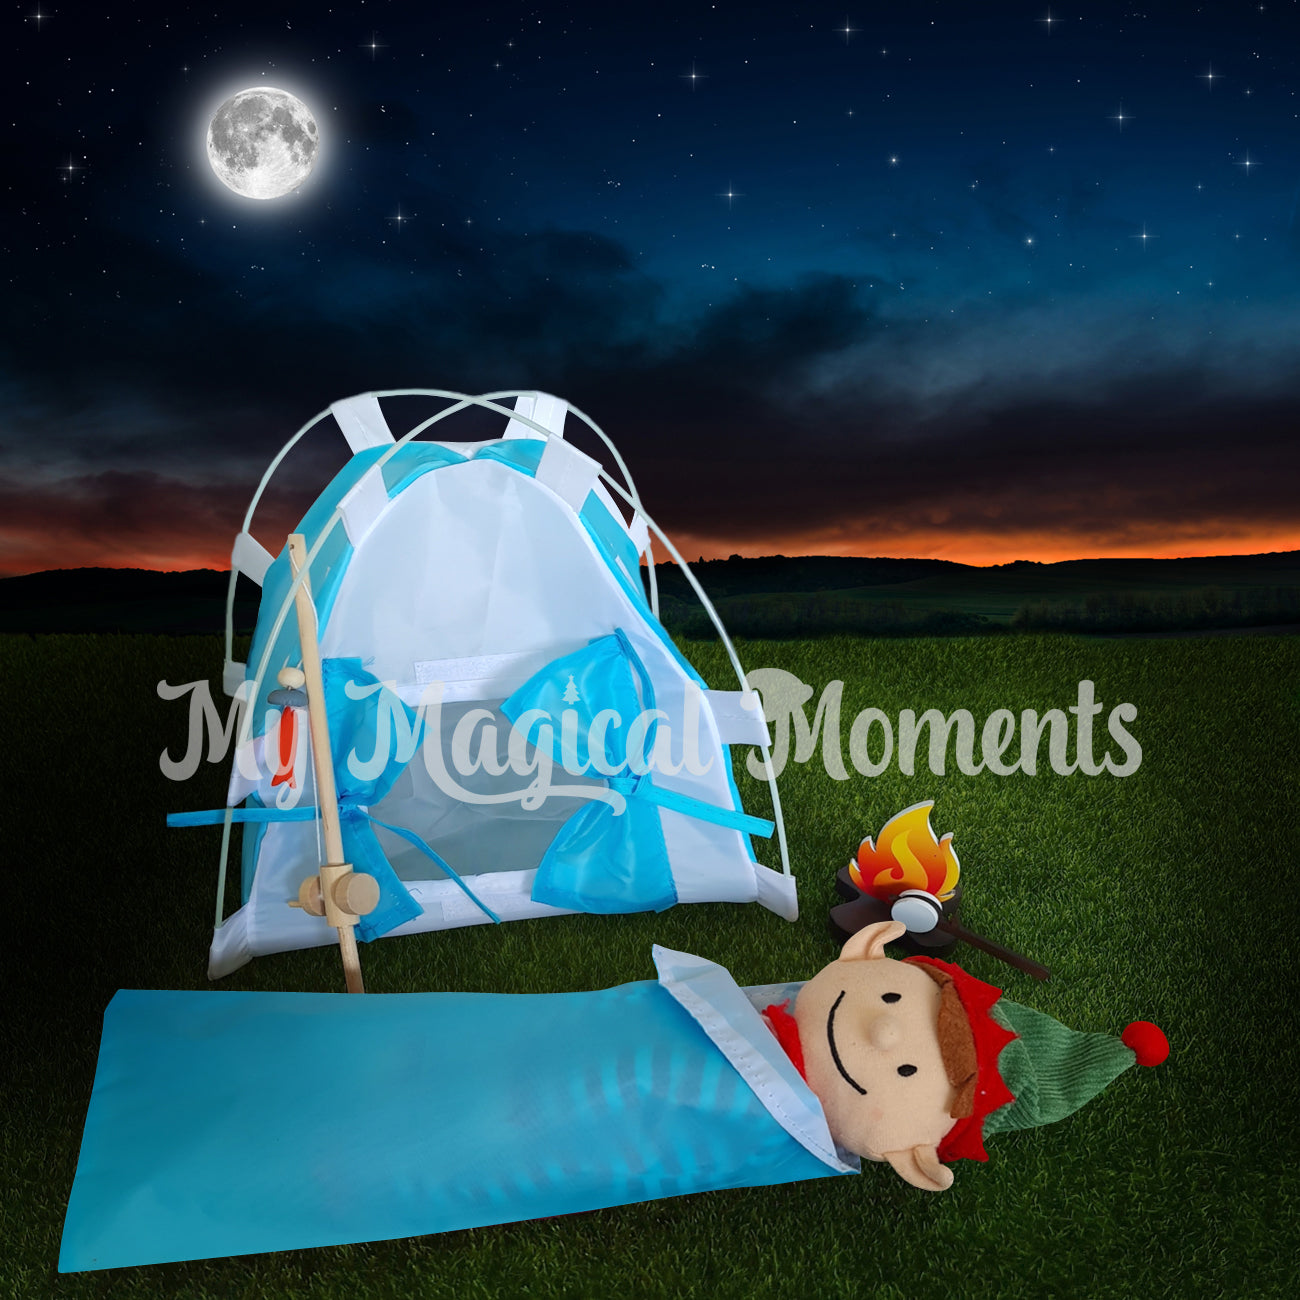 Elf for christmas camping with a tent, sleeping bag and miniature fire pit